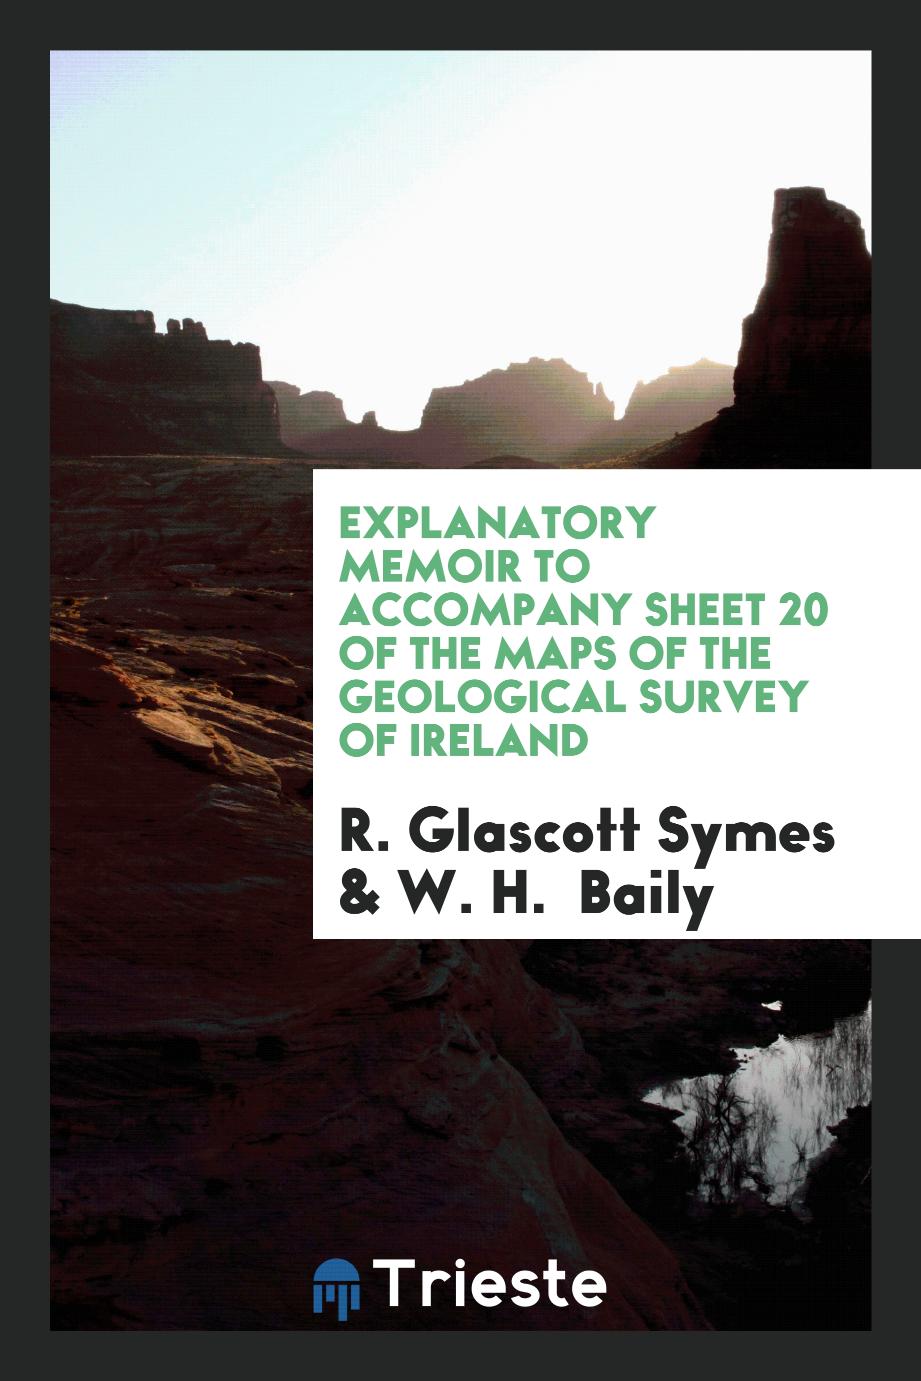 Explanatory memoir to accompany sheet 20 of the maps of the geological survey of Ireland